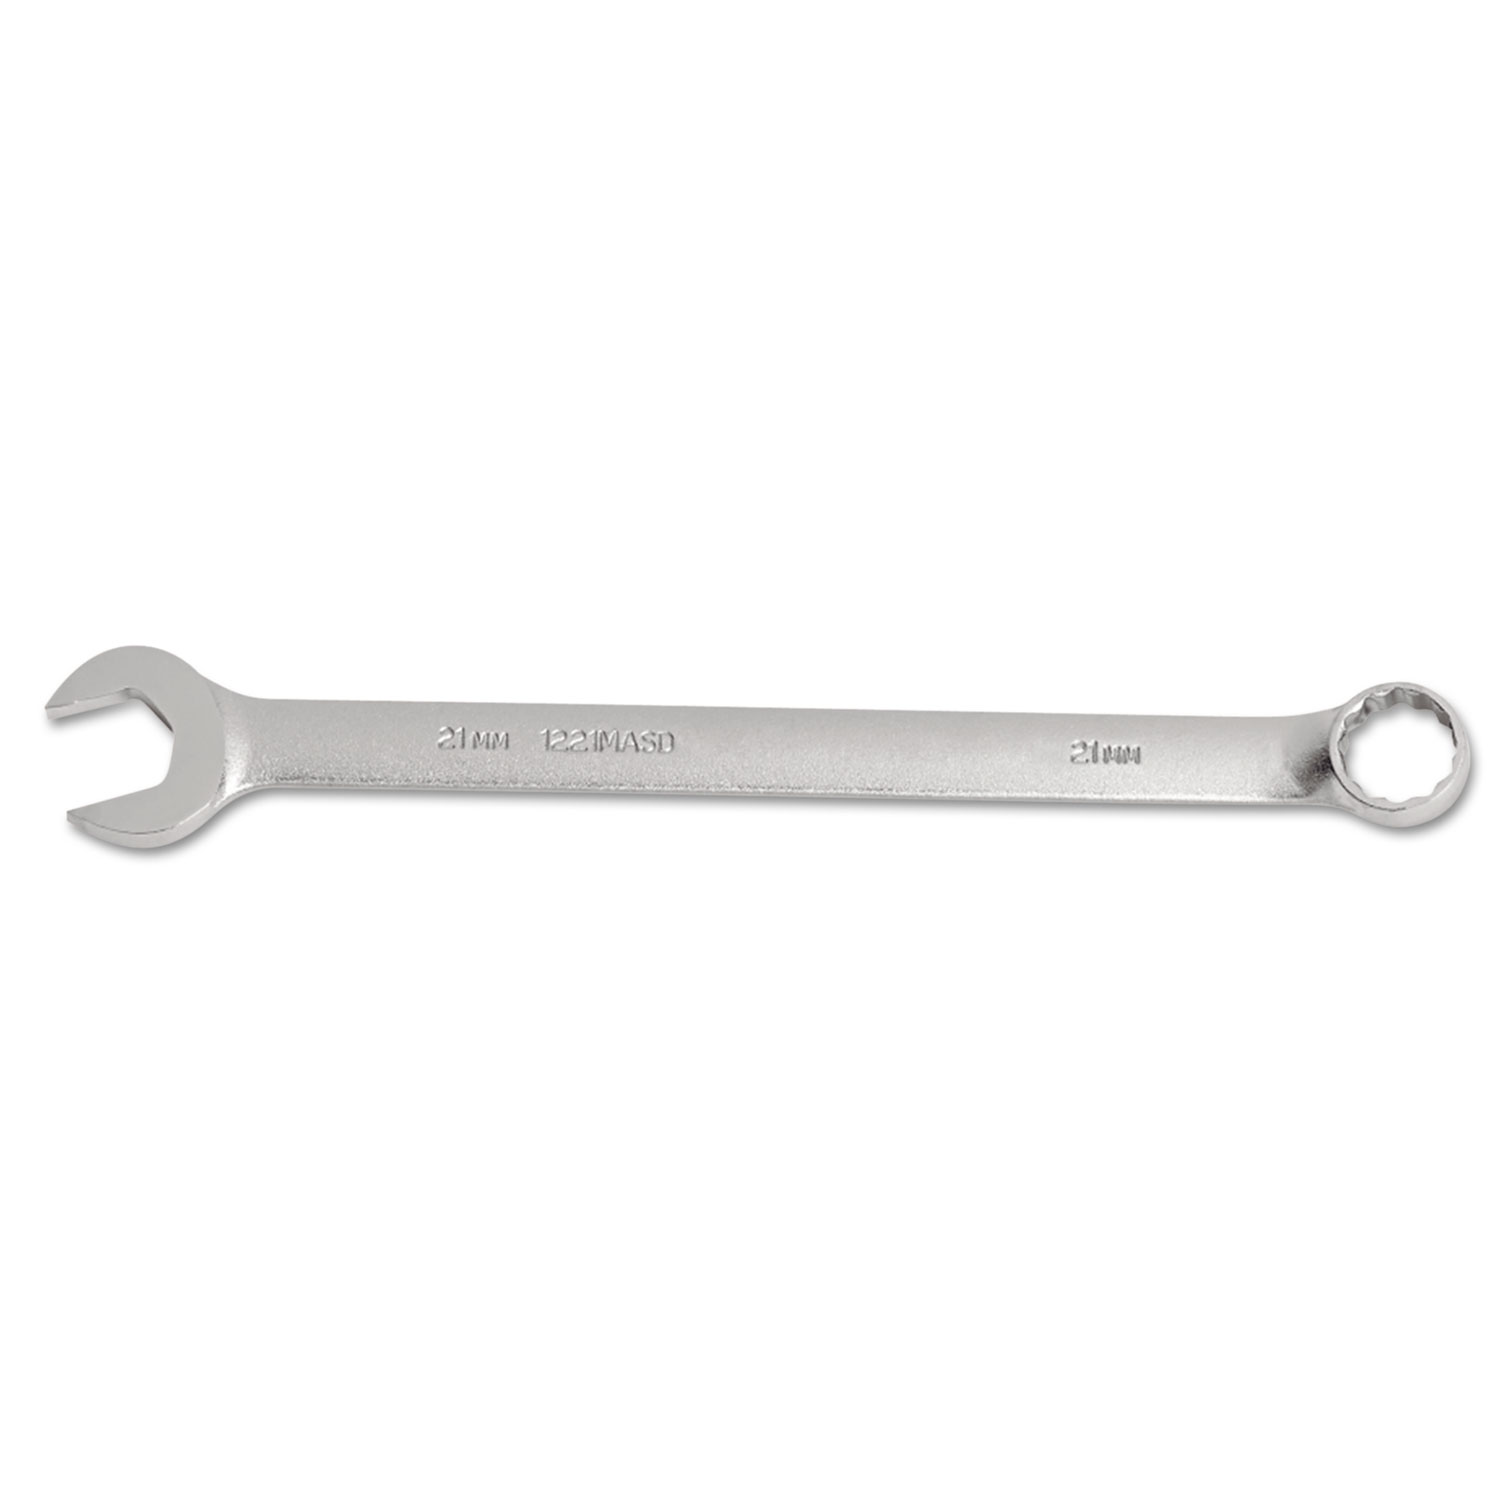 Torqueplus 12-Point Combination Wrench, 32mm, 12 Point Combination Wrench